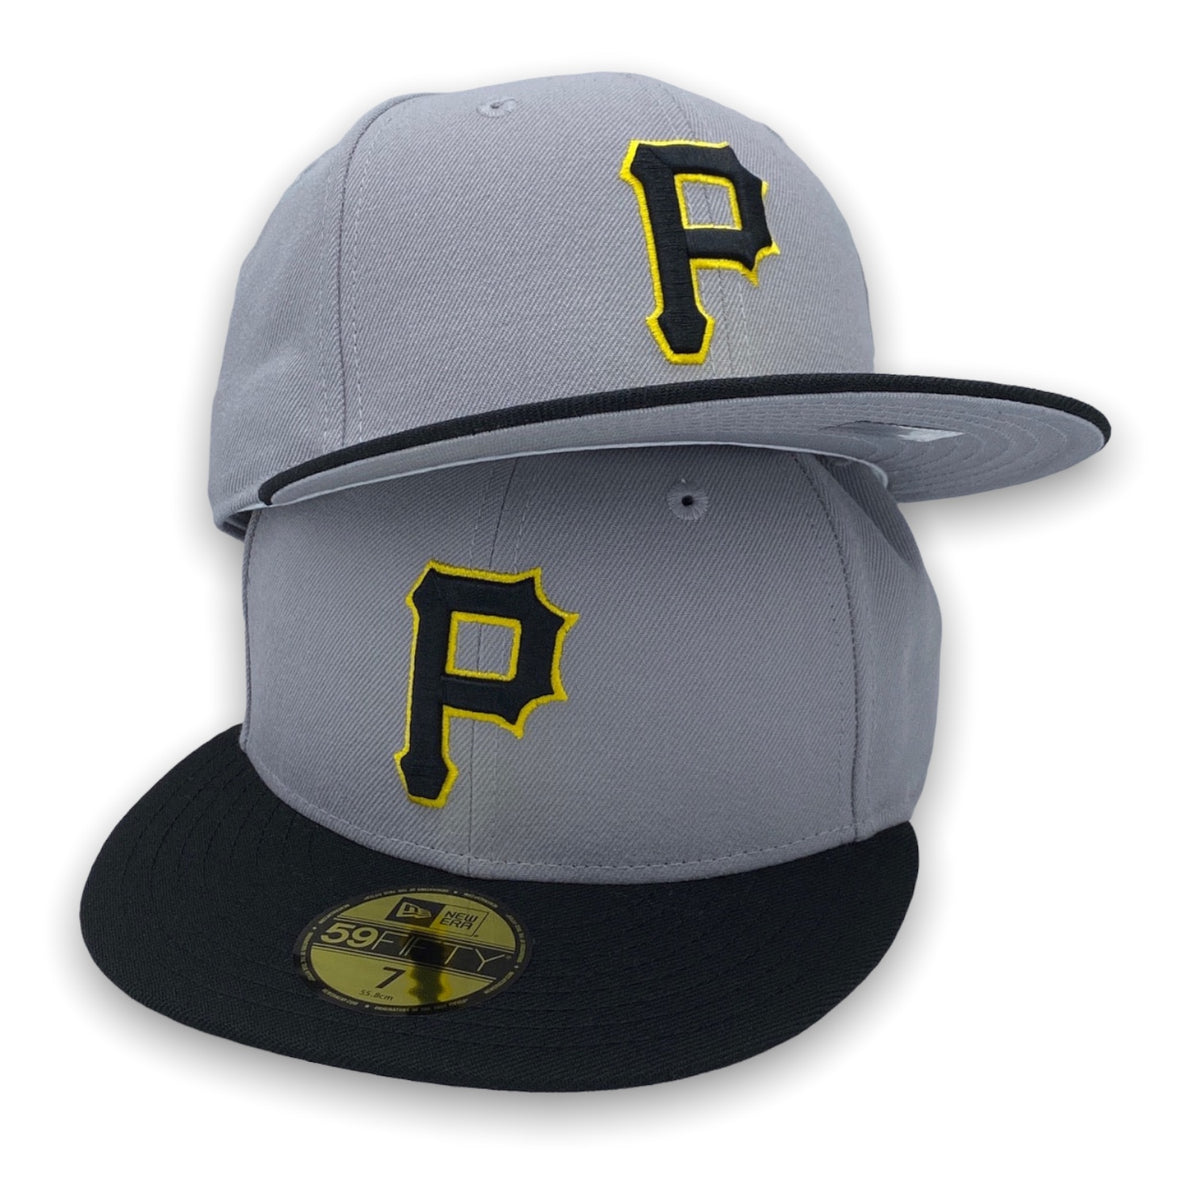 Shop New Era 59Fifty Pittsburgh Pirates Two Tone Fitted Hat 70703498 black